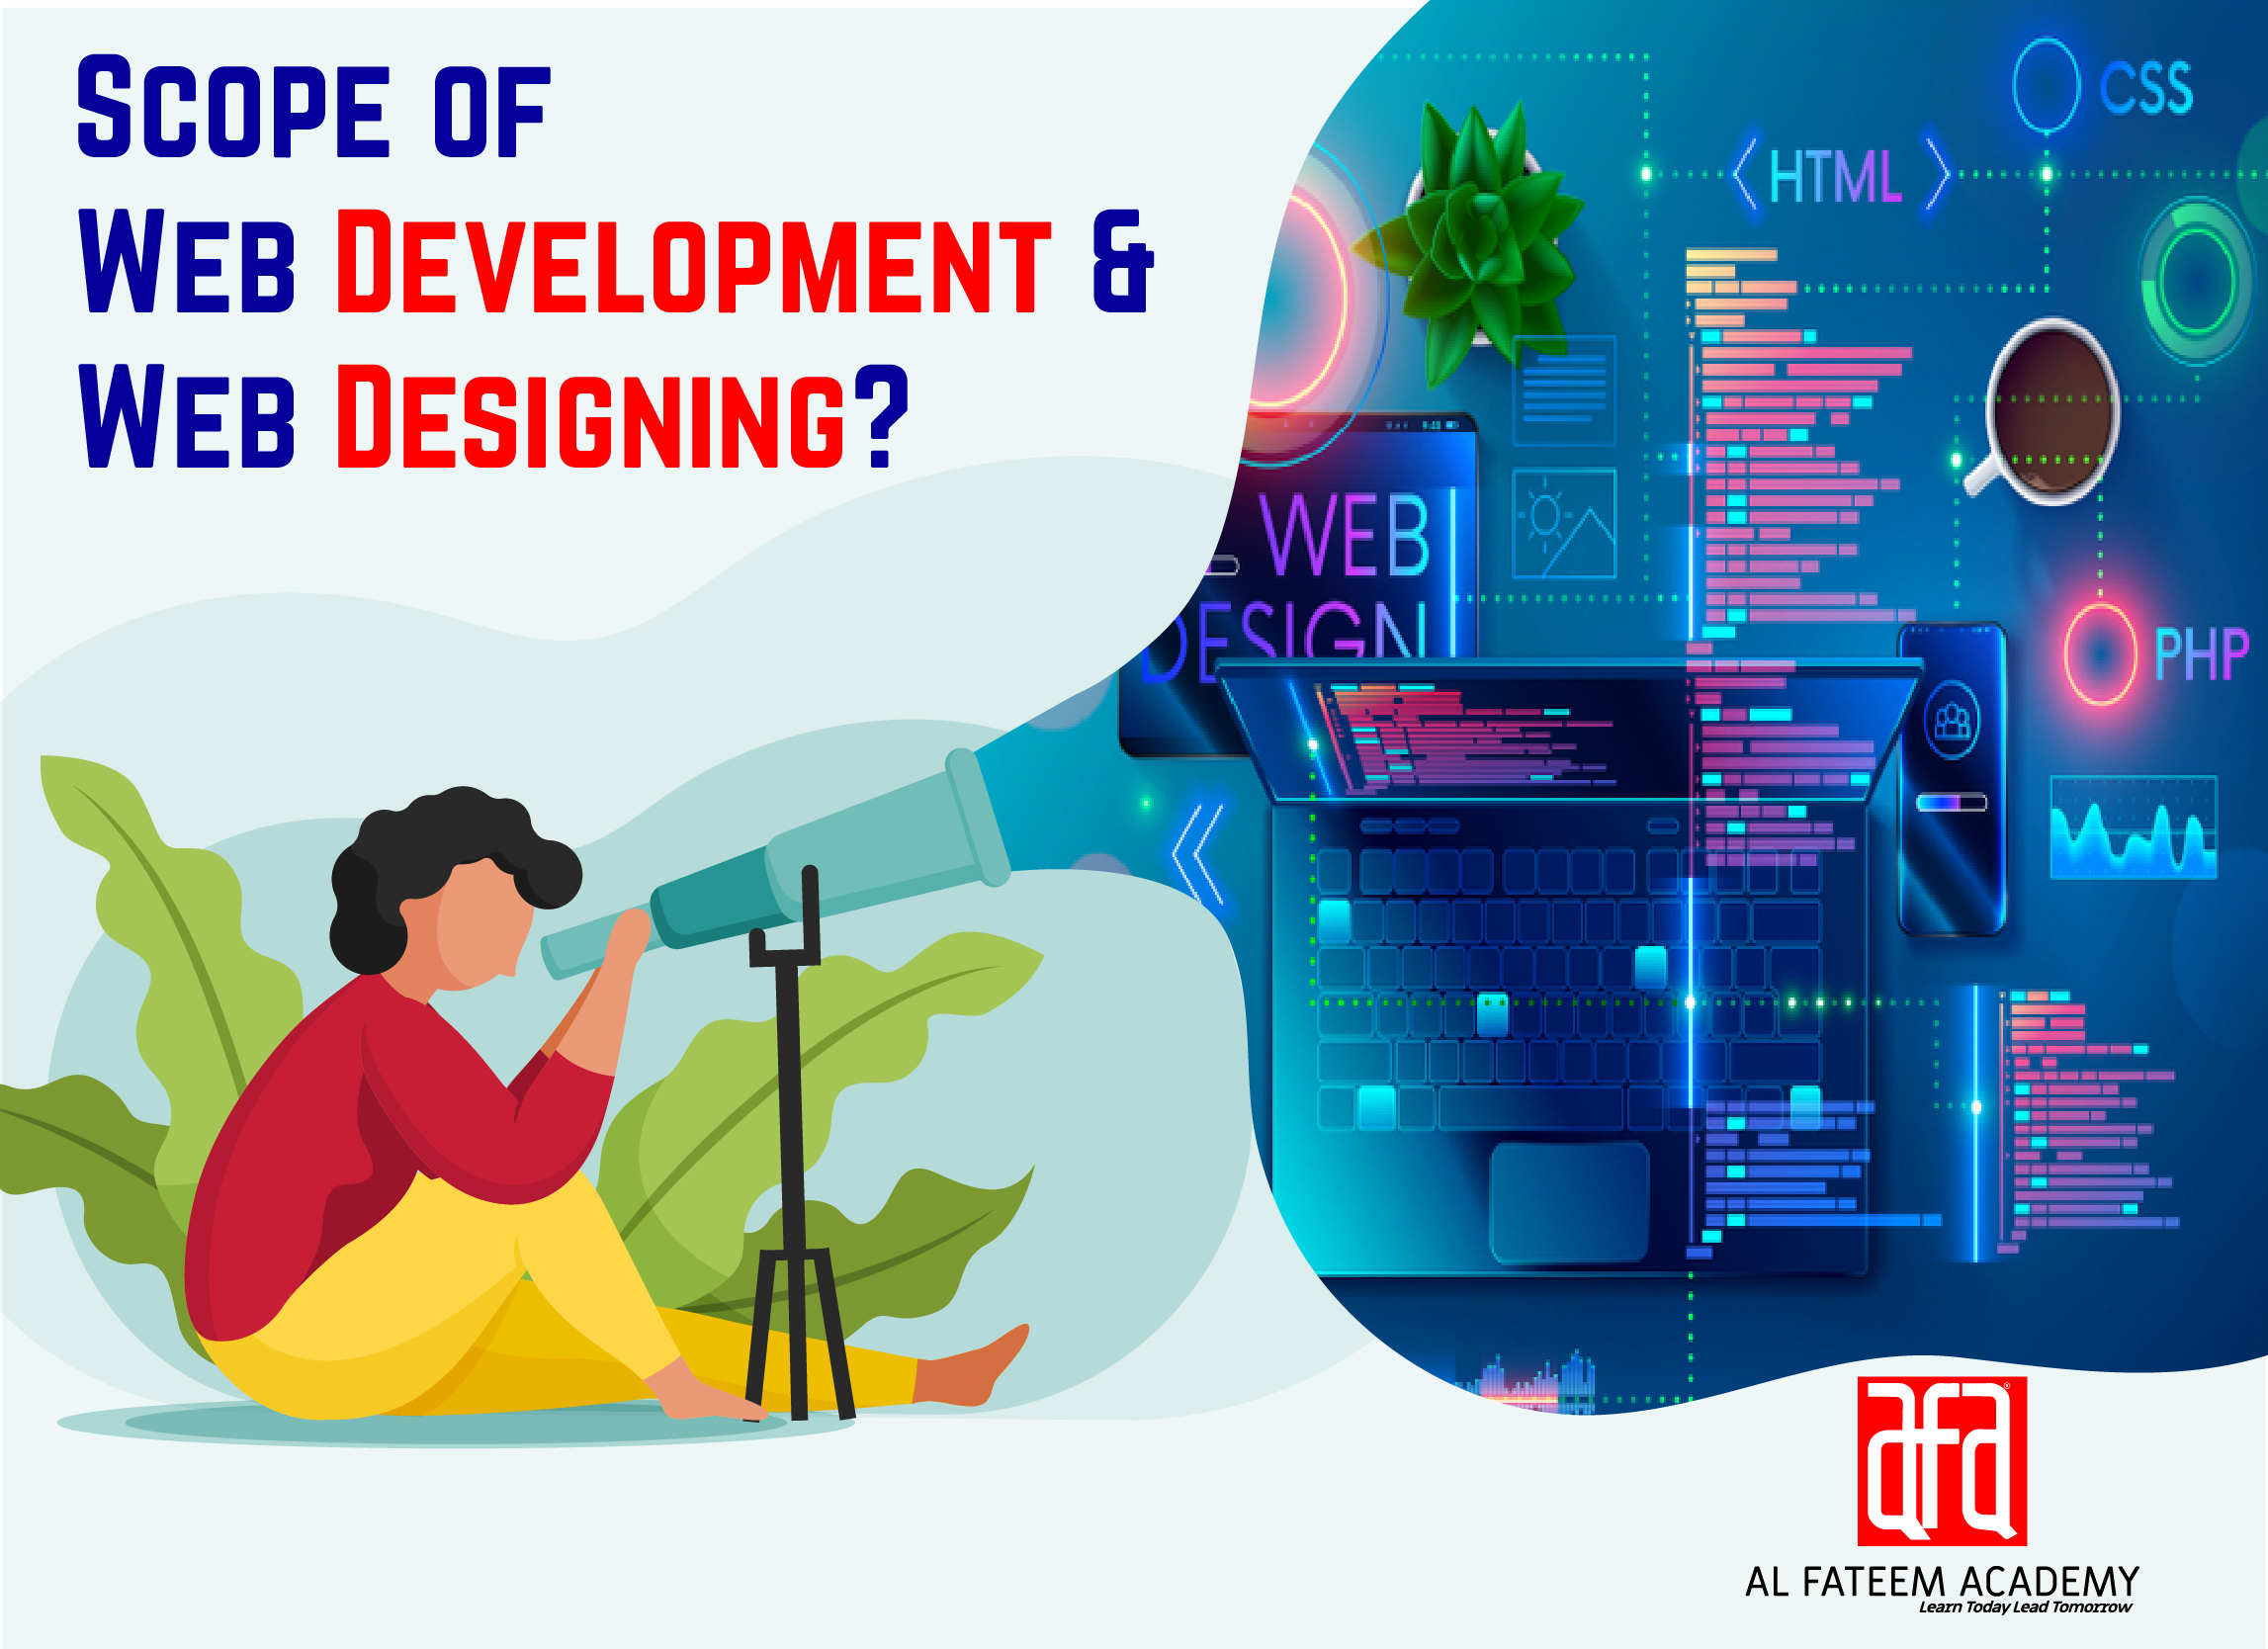 What is Web Development and Web Designing? What is their Scope?